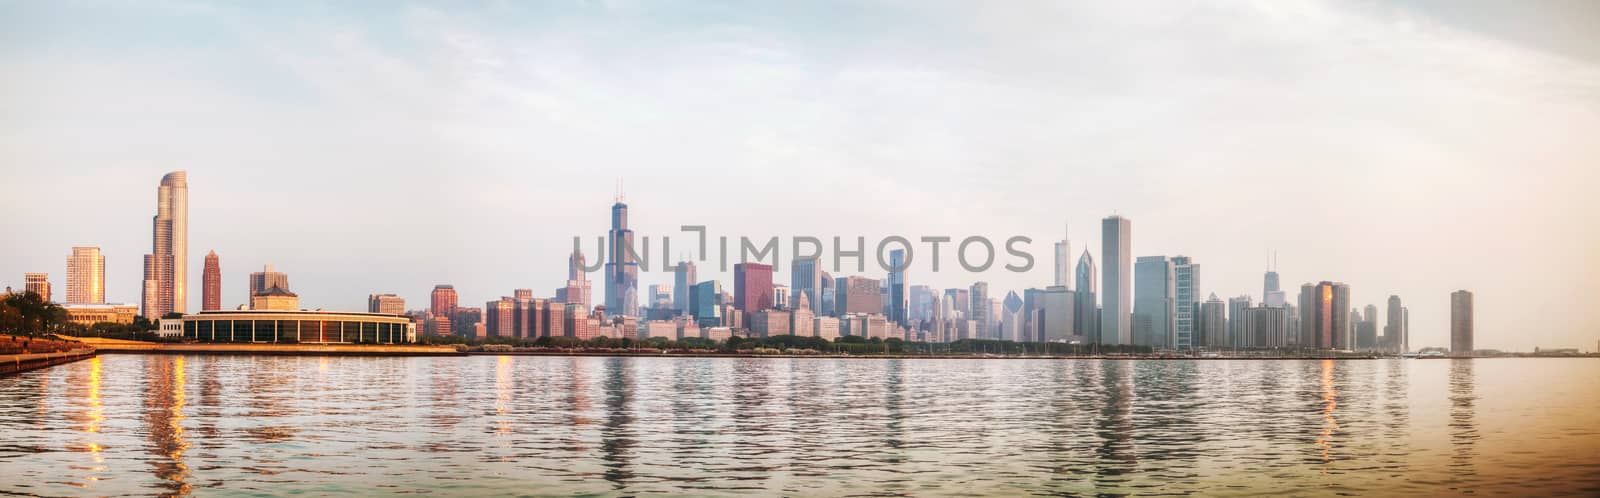 Downtown Chicago, IL on a cloudy day by AndreyKr